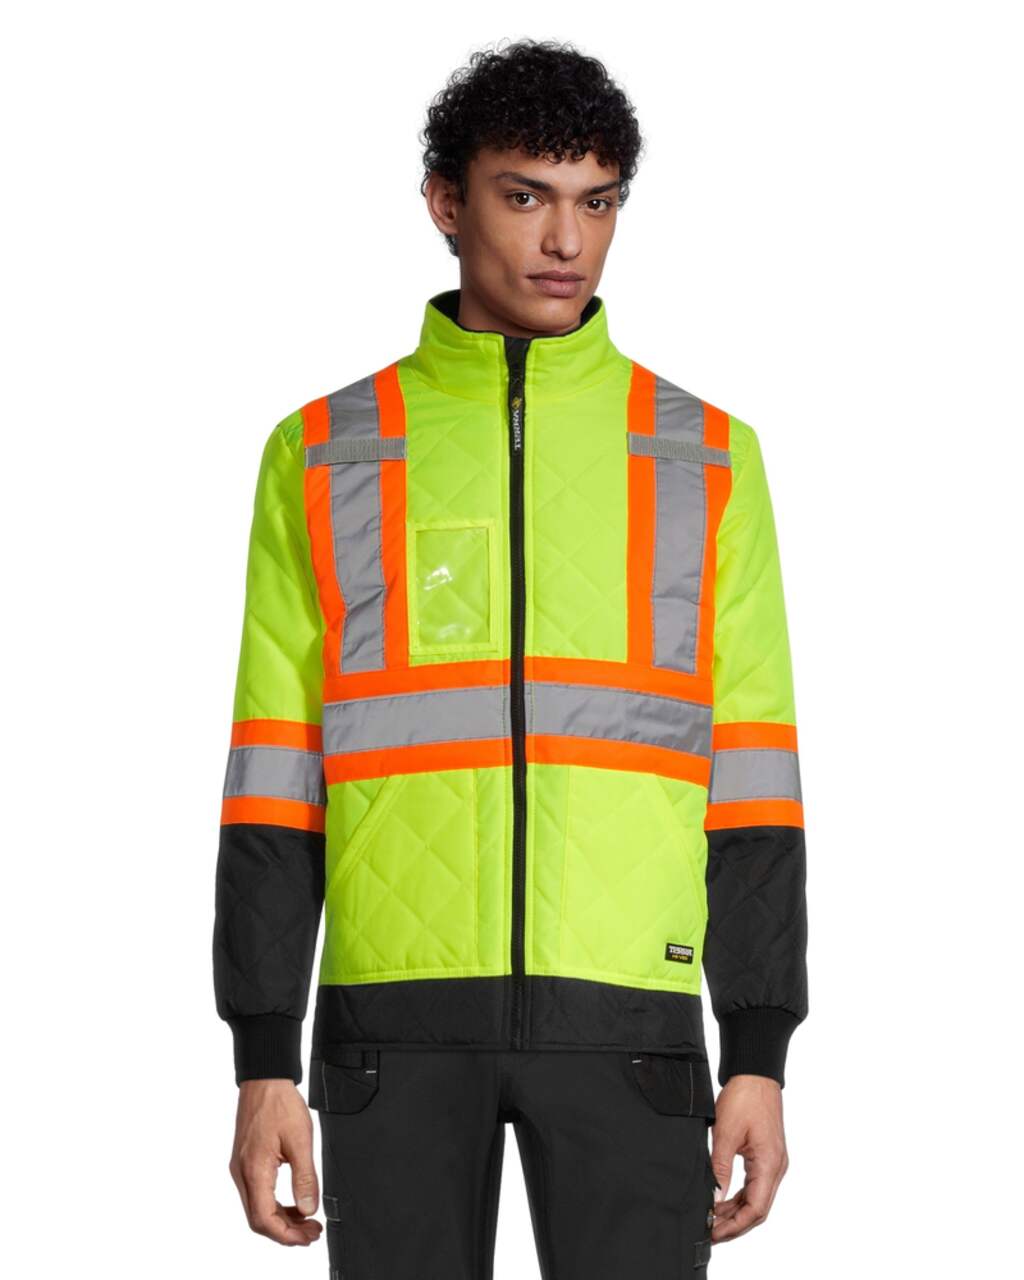 Terra Hi-Vis Lined Work Jacket with Reflective Tape and Stand up Collar for  Warmth, Yellow